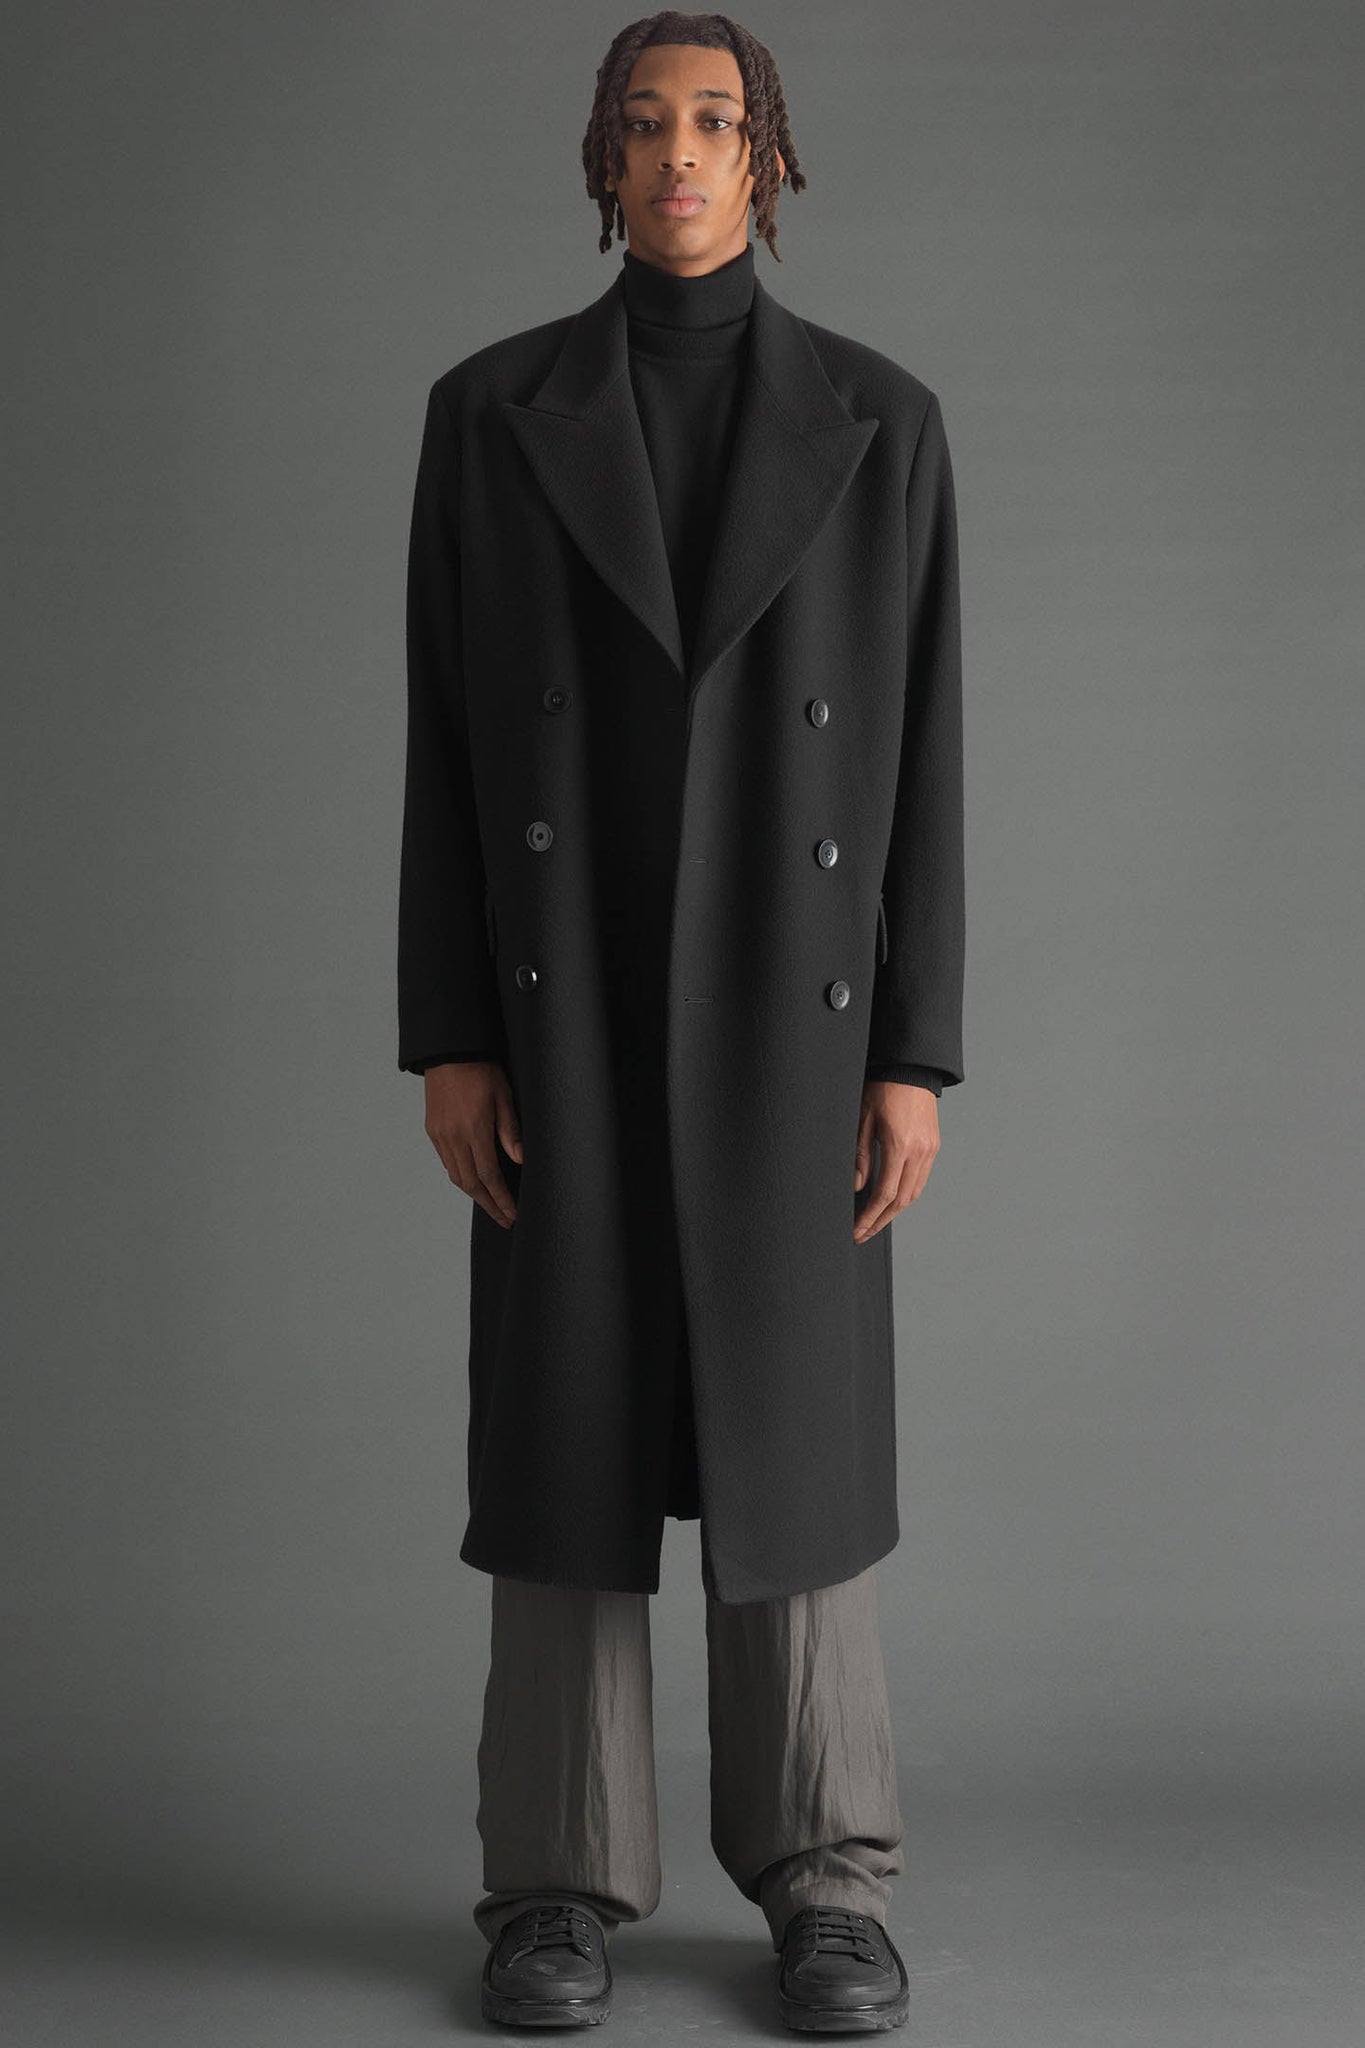 Time coat by Hope - black soft wool